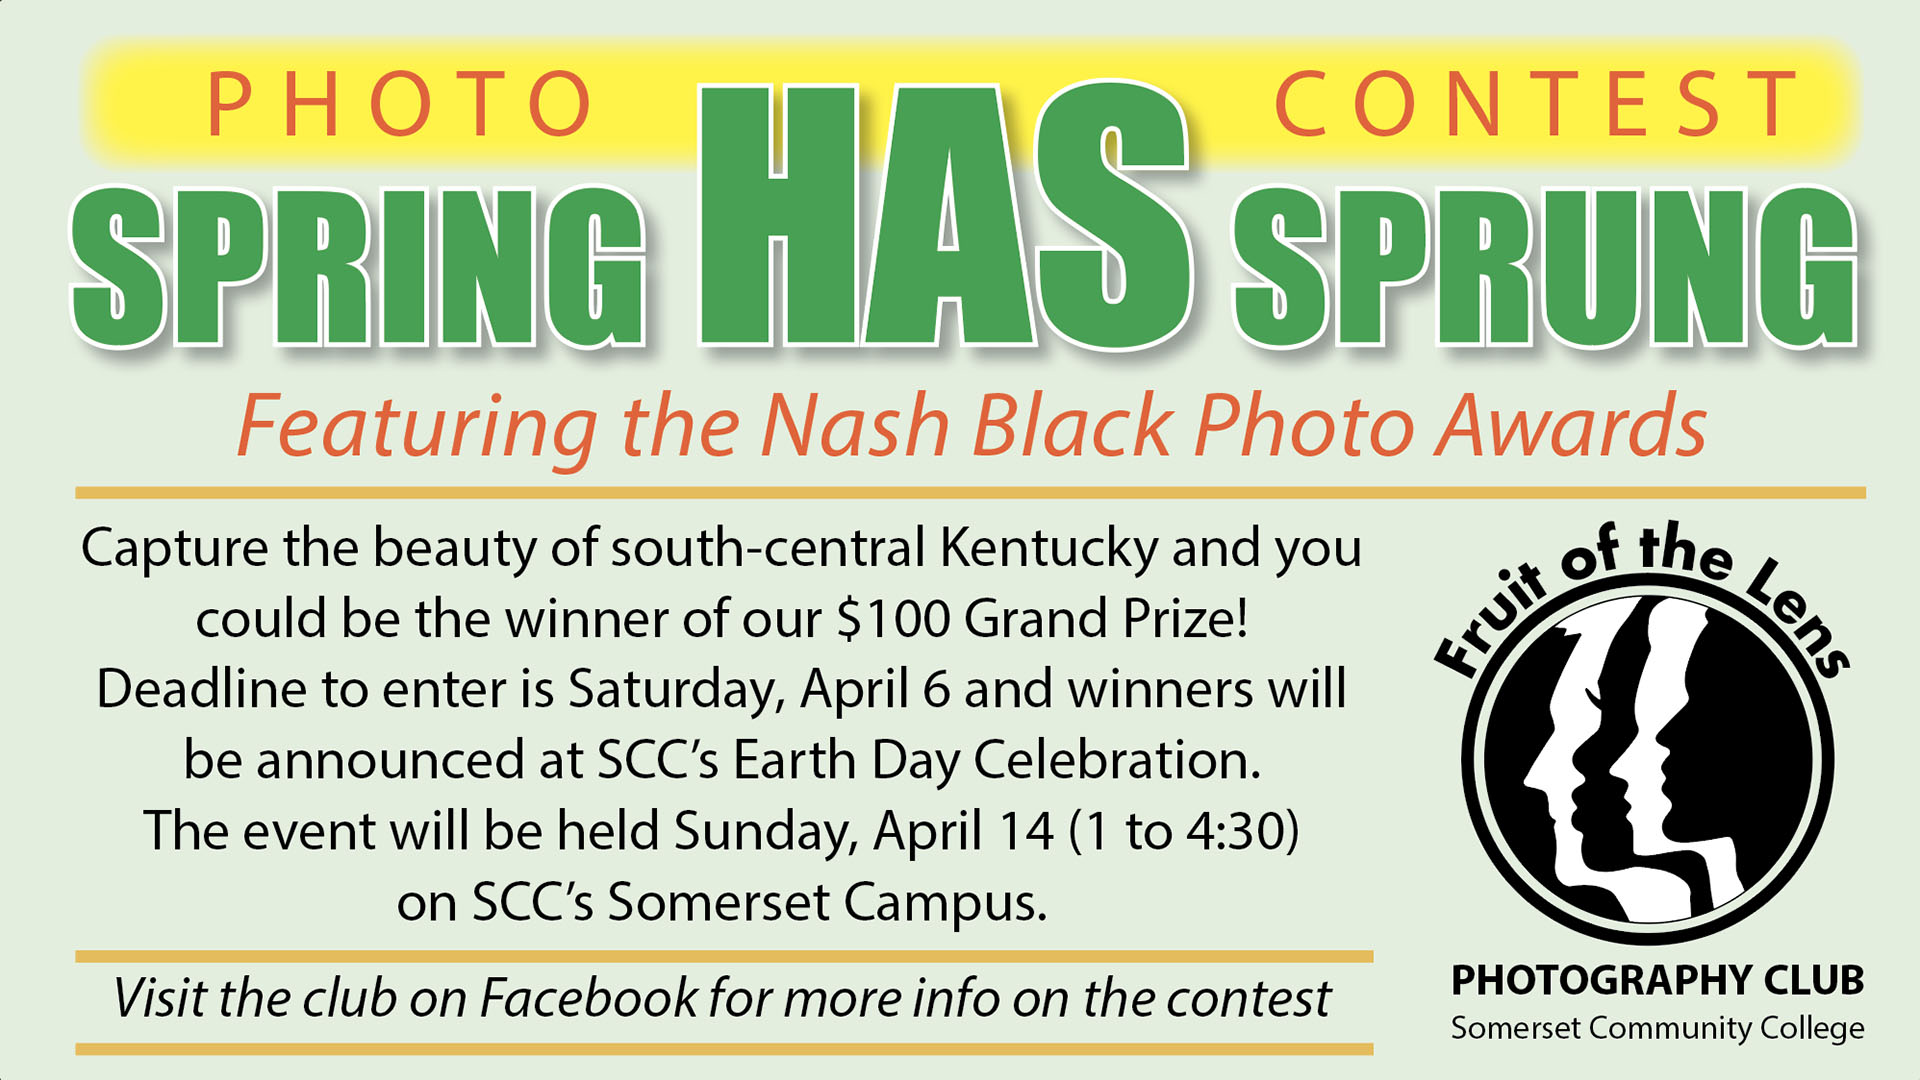 Spring Has Sprung Photo Contest (more info. in article)